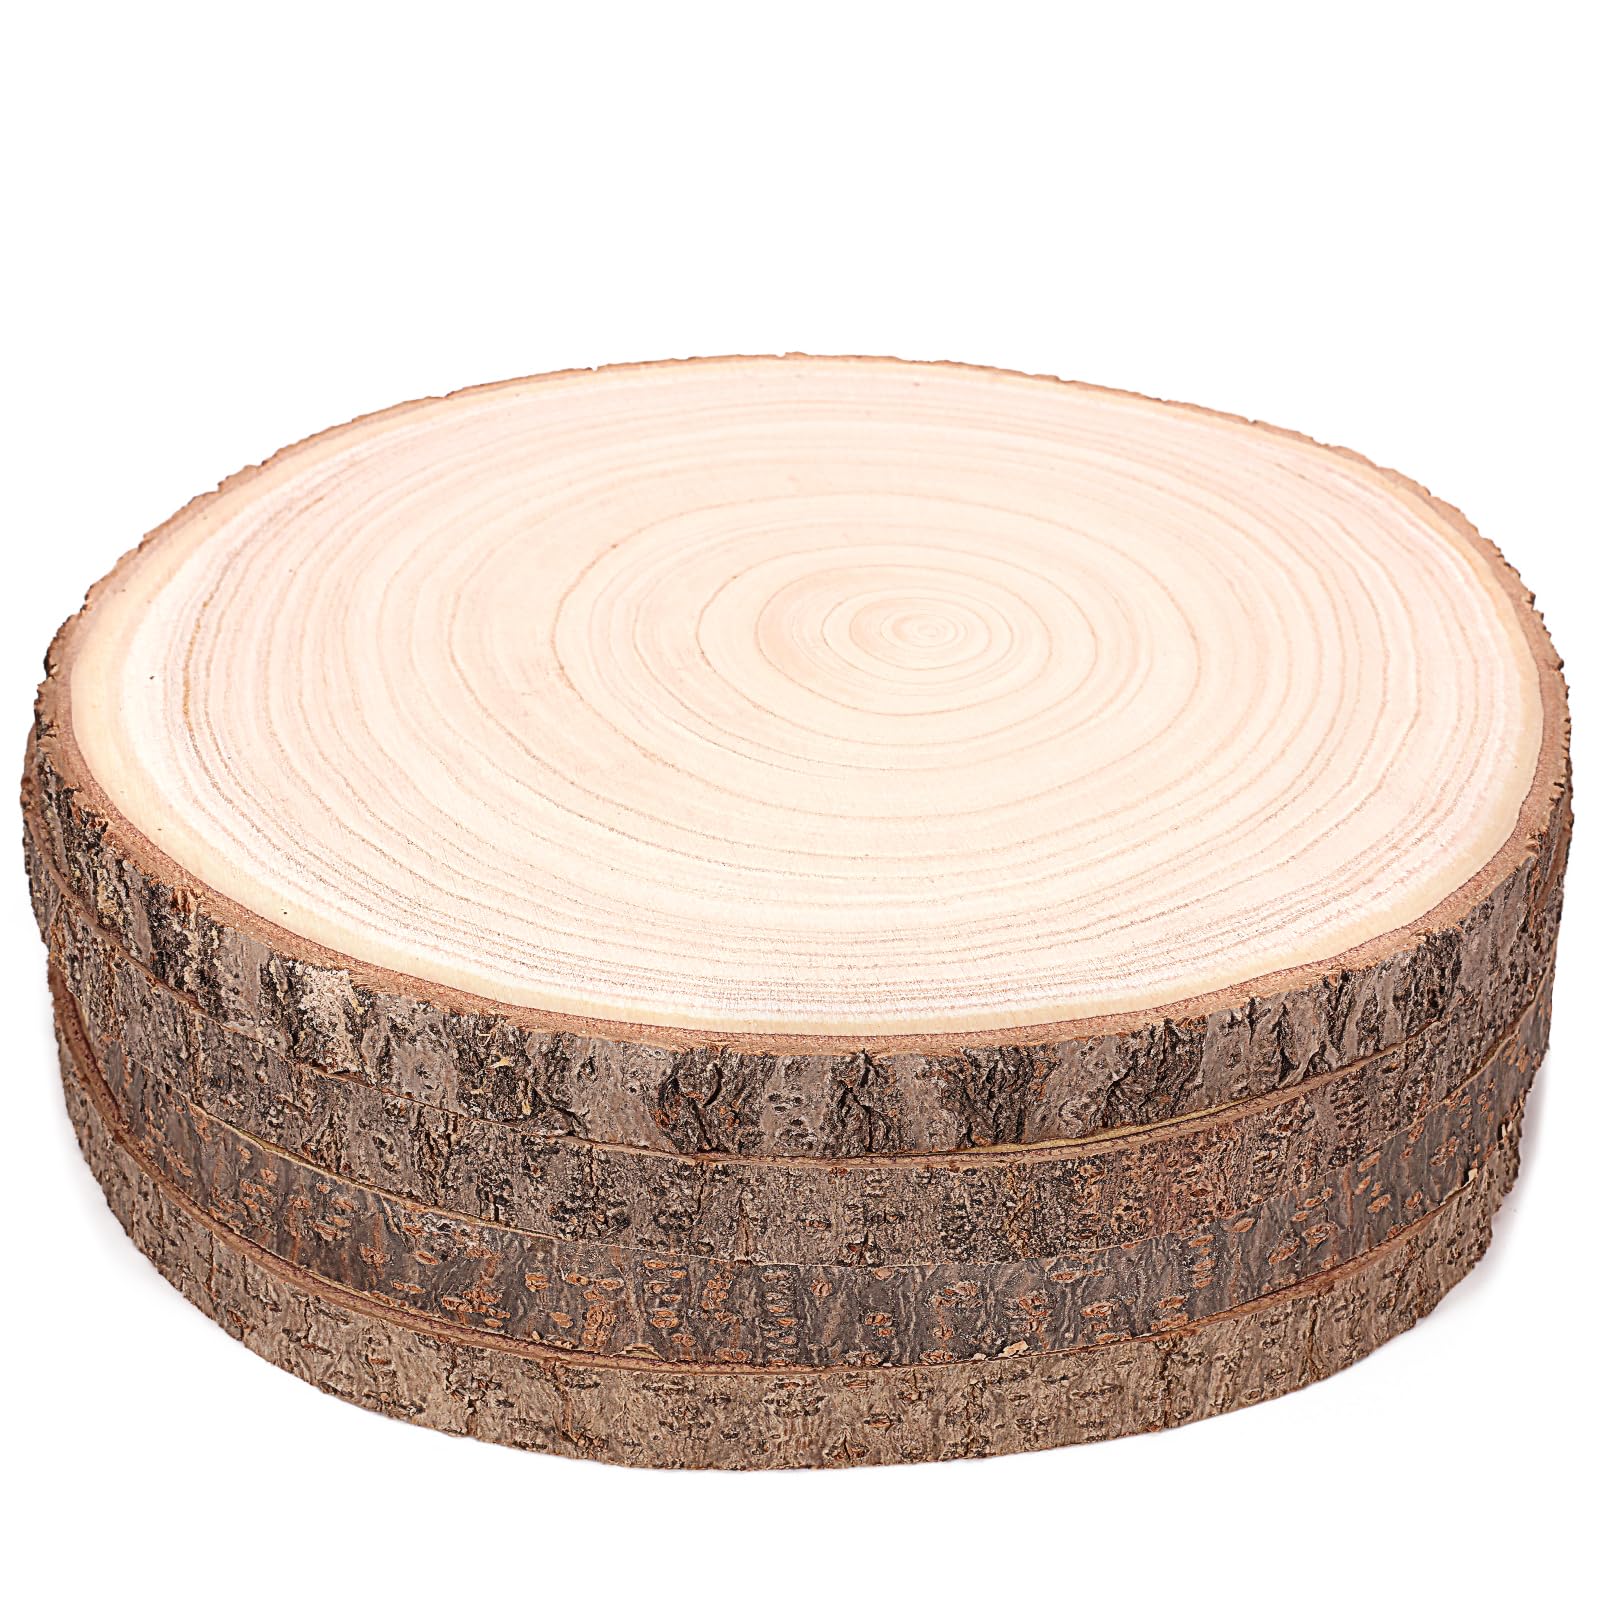  Caydo 8 Pieces 9-10 Inch Wood Centerpieces for Tables, Poplar  Wood Slices for Wedding Table Centerpiece Decoration, Painting, Pyrograph  and DIY Projects